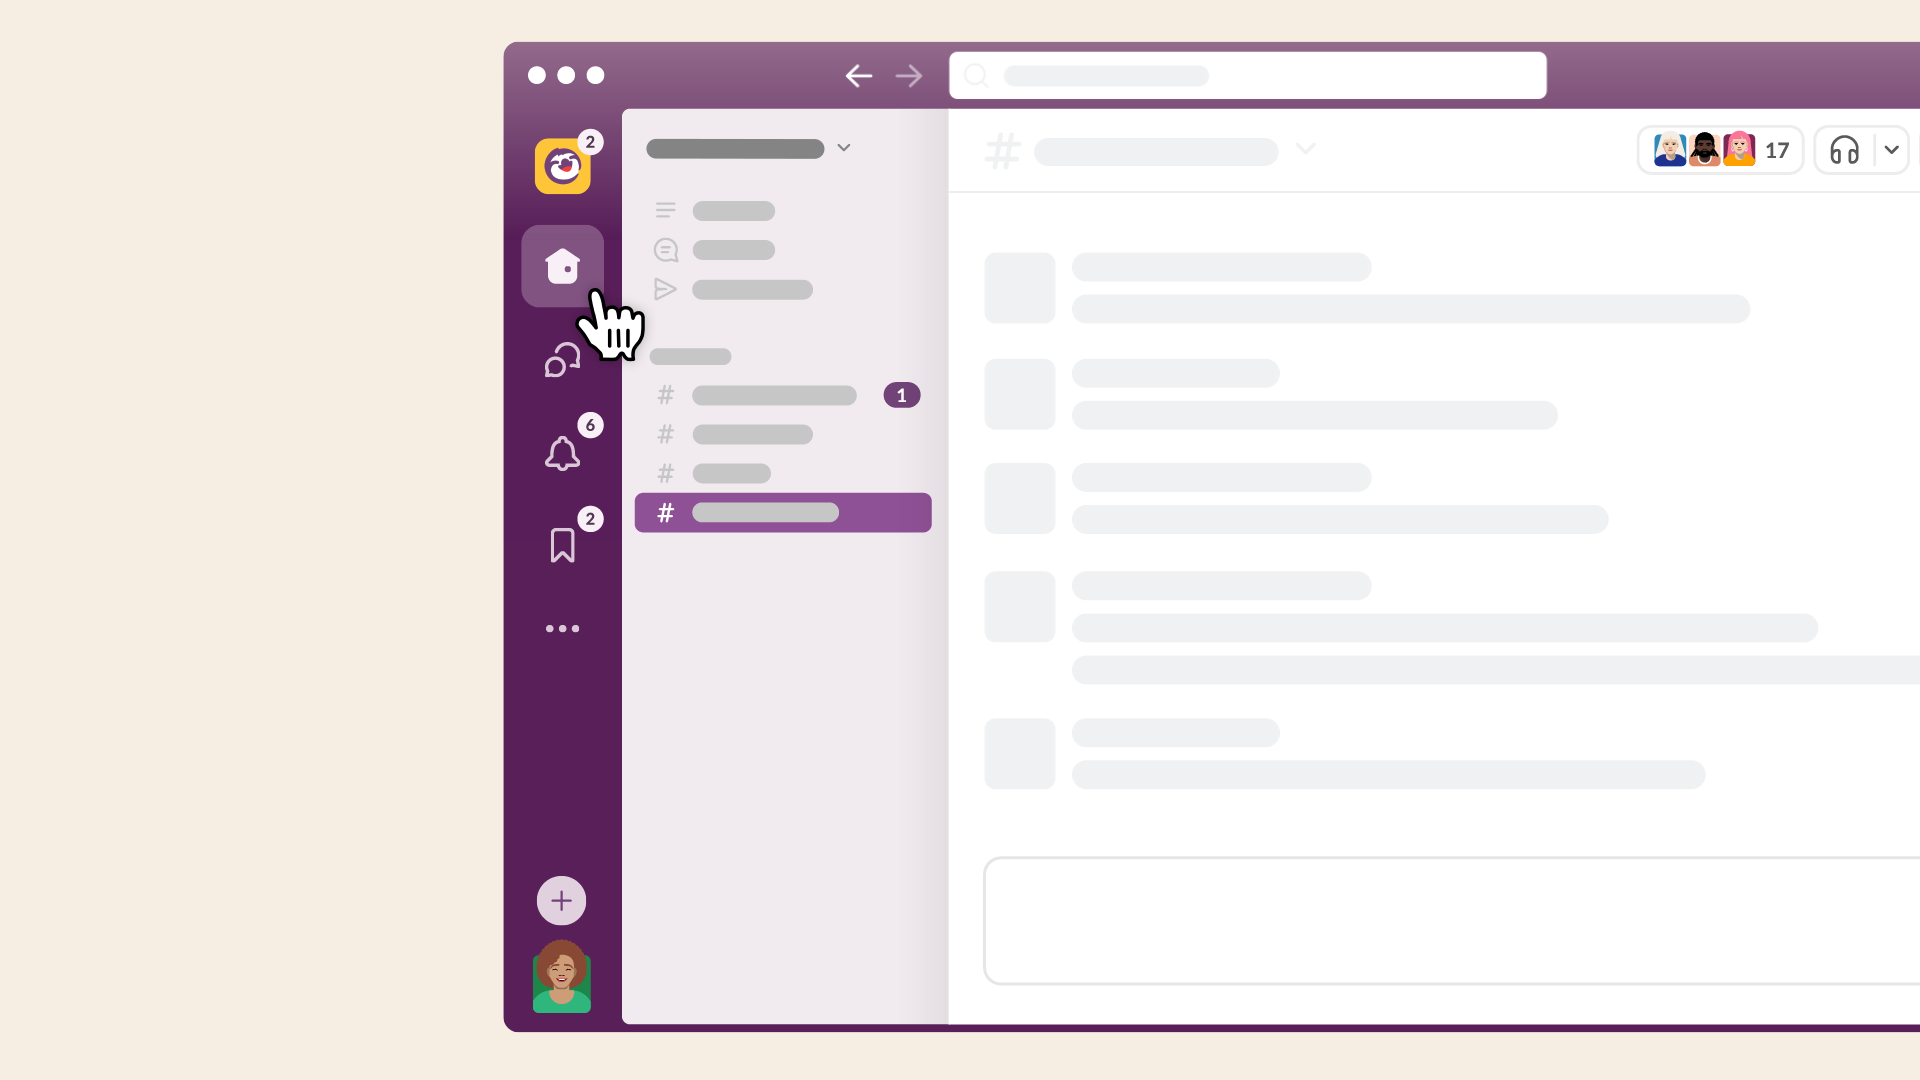 View of the Slack interface, including the search bar, plus button and profile picture